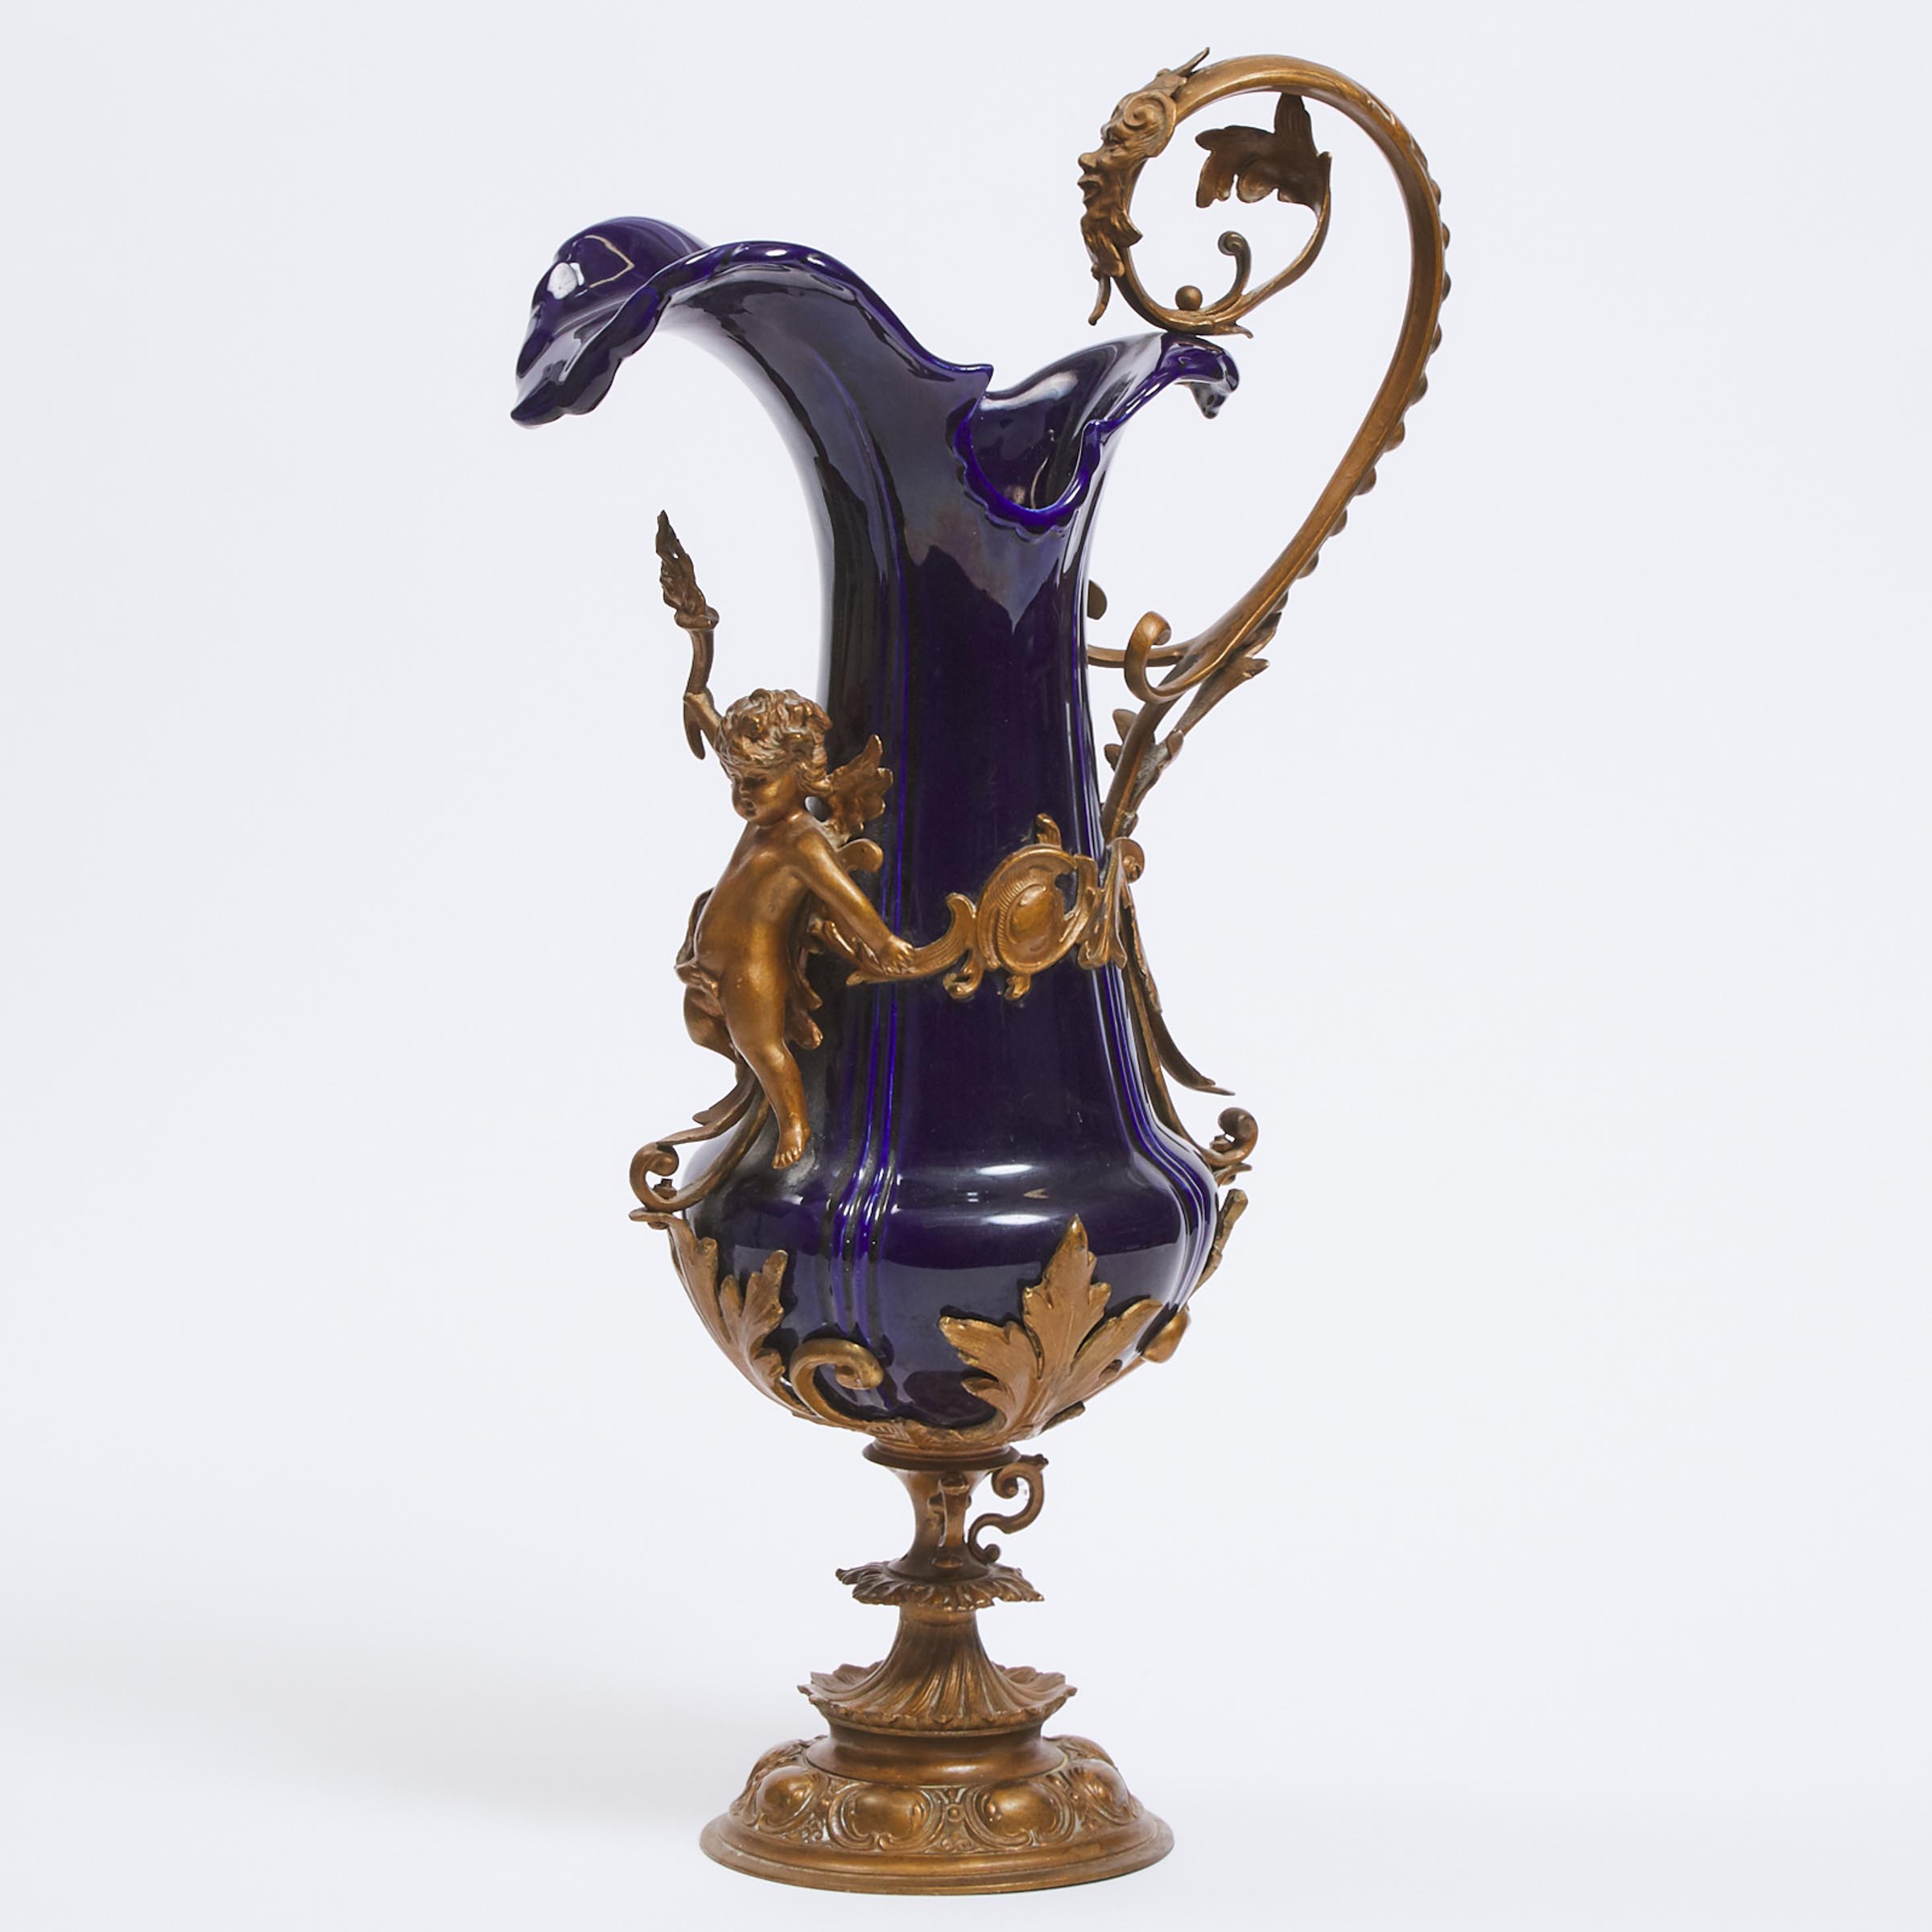 Large French Cobalt Blue Ceramic and Gilt Metal Ewer, mid 19th century